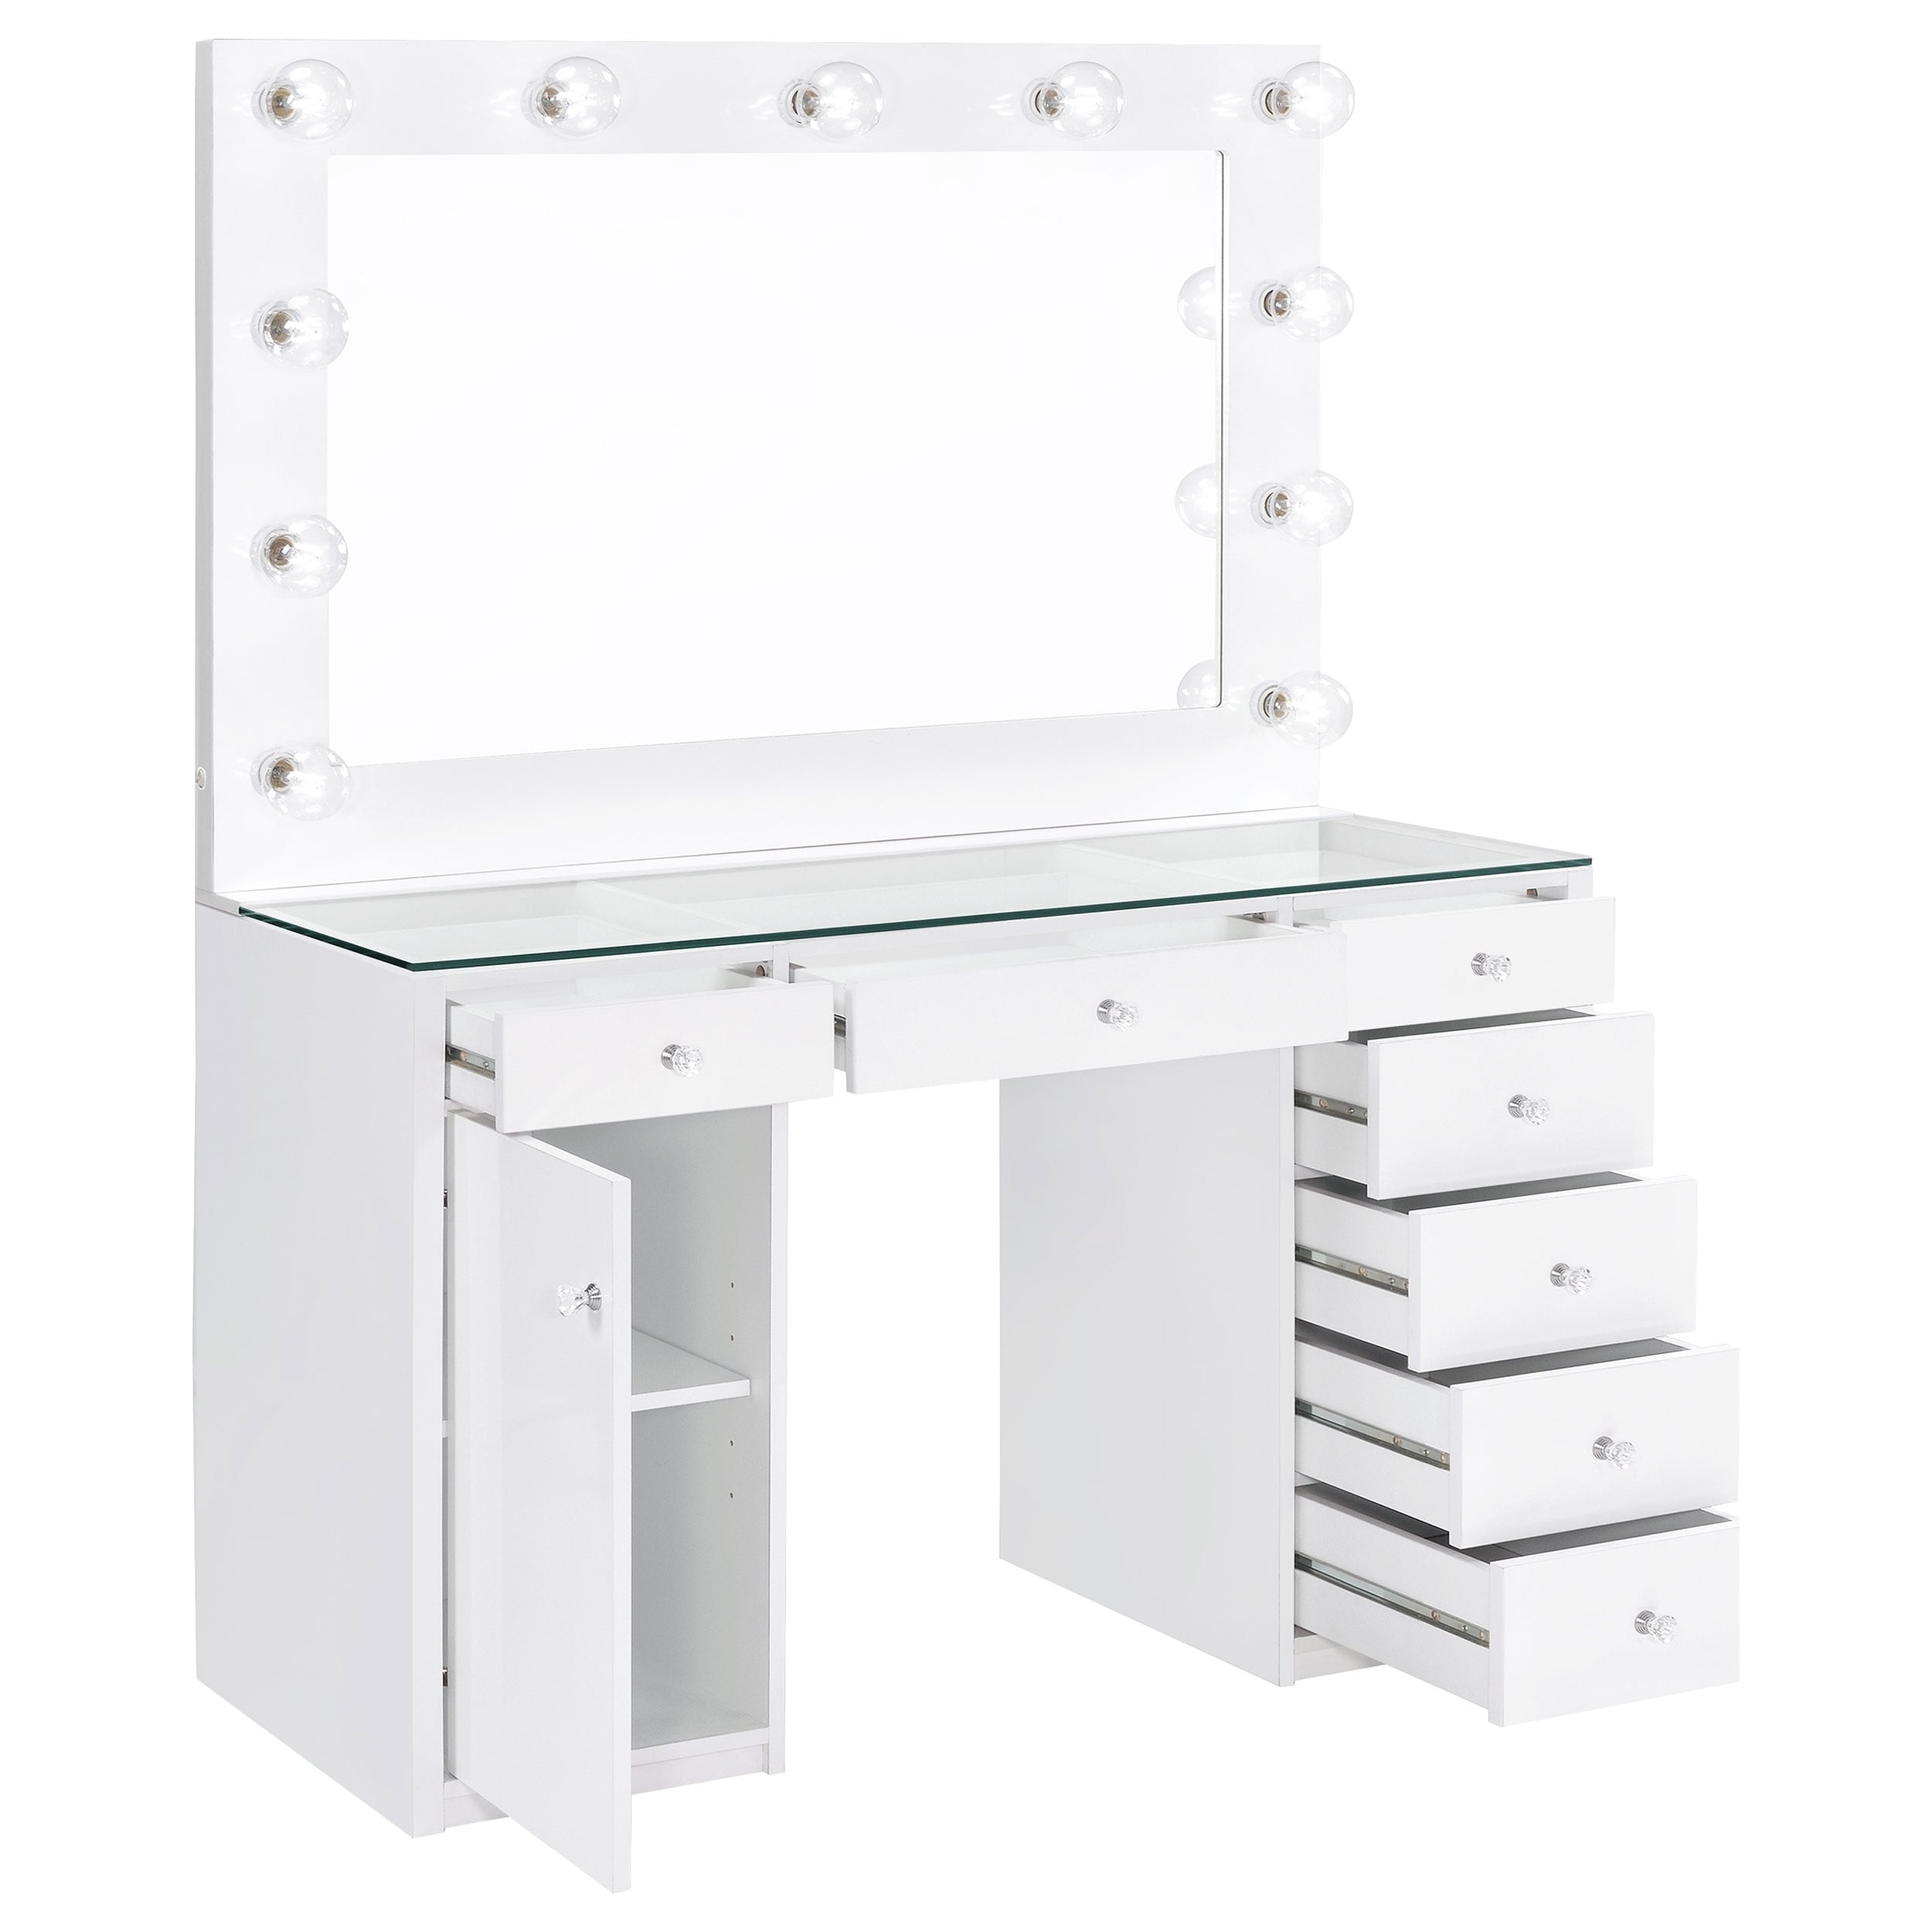 Atlanta Package Deal Mirrored Grey 7 Draw Dressing Table & Stool - pre  order special offer price Feb 10th arrival